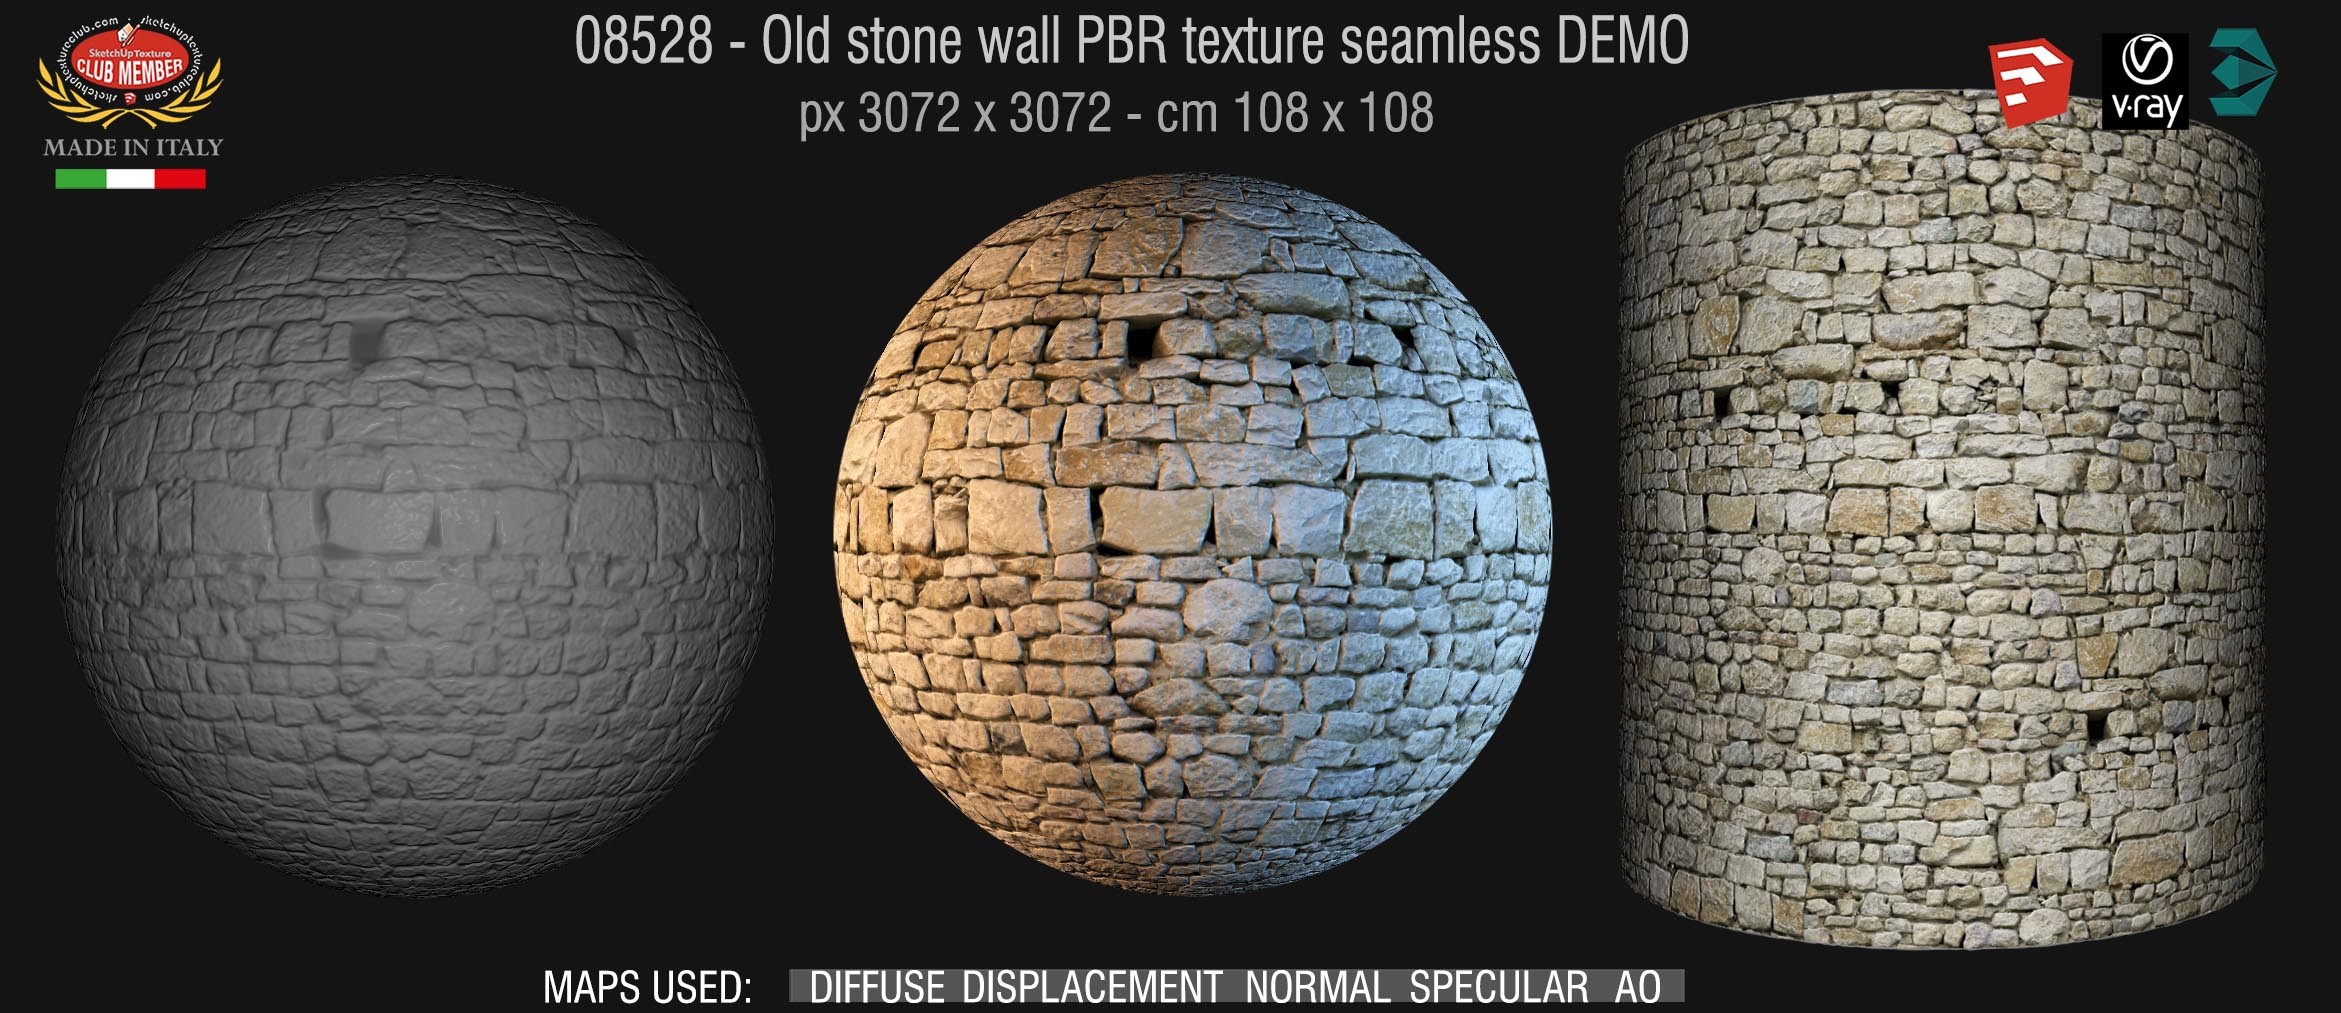 08528 Old stone wall PBR texture seamless DEMO